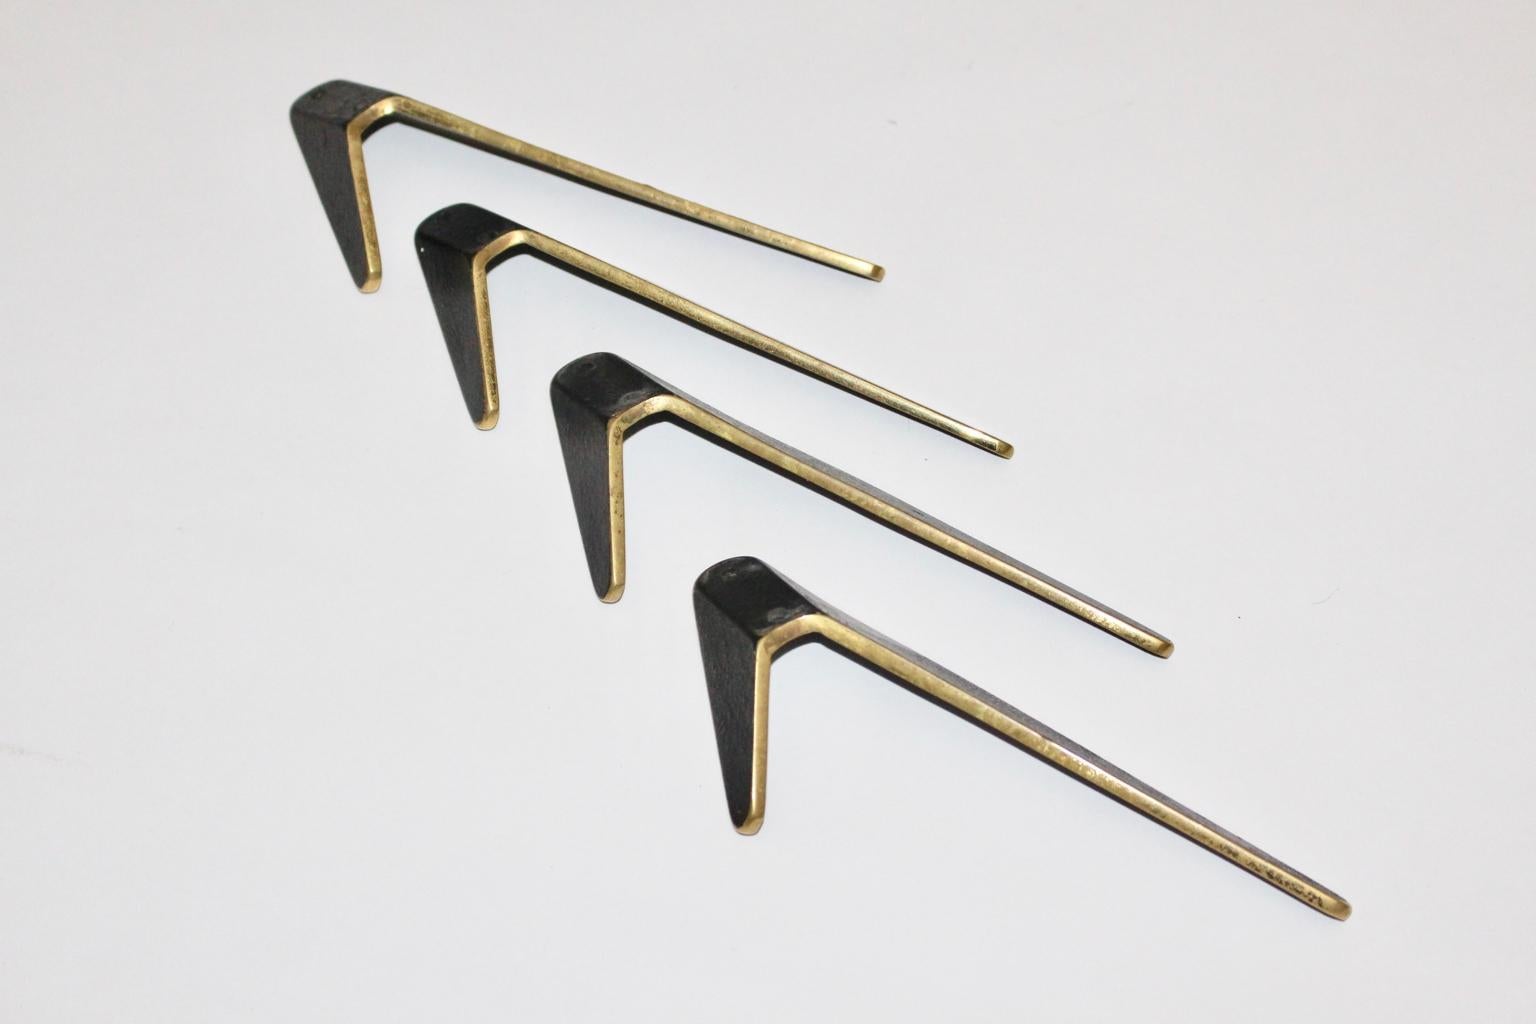 This Mid-Century Modern vintage set of four wall hooks by Herta Baller 1950, Austria, was made of brass and partly black lacquered.
The vintage condition is very good.
Approximate measures:
Length 17 cm
Depth 8 cm
Width 14 cm.